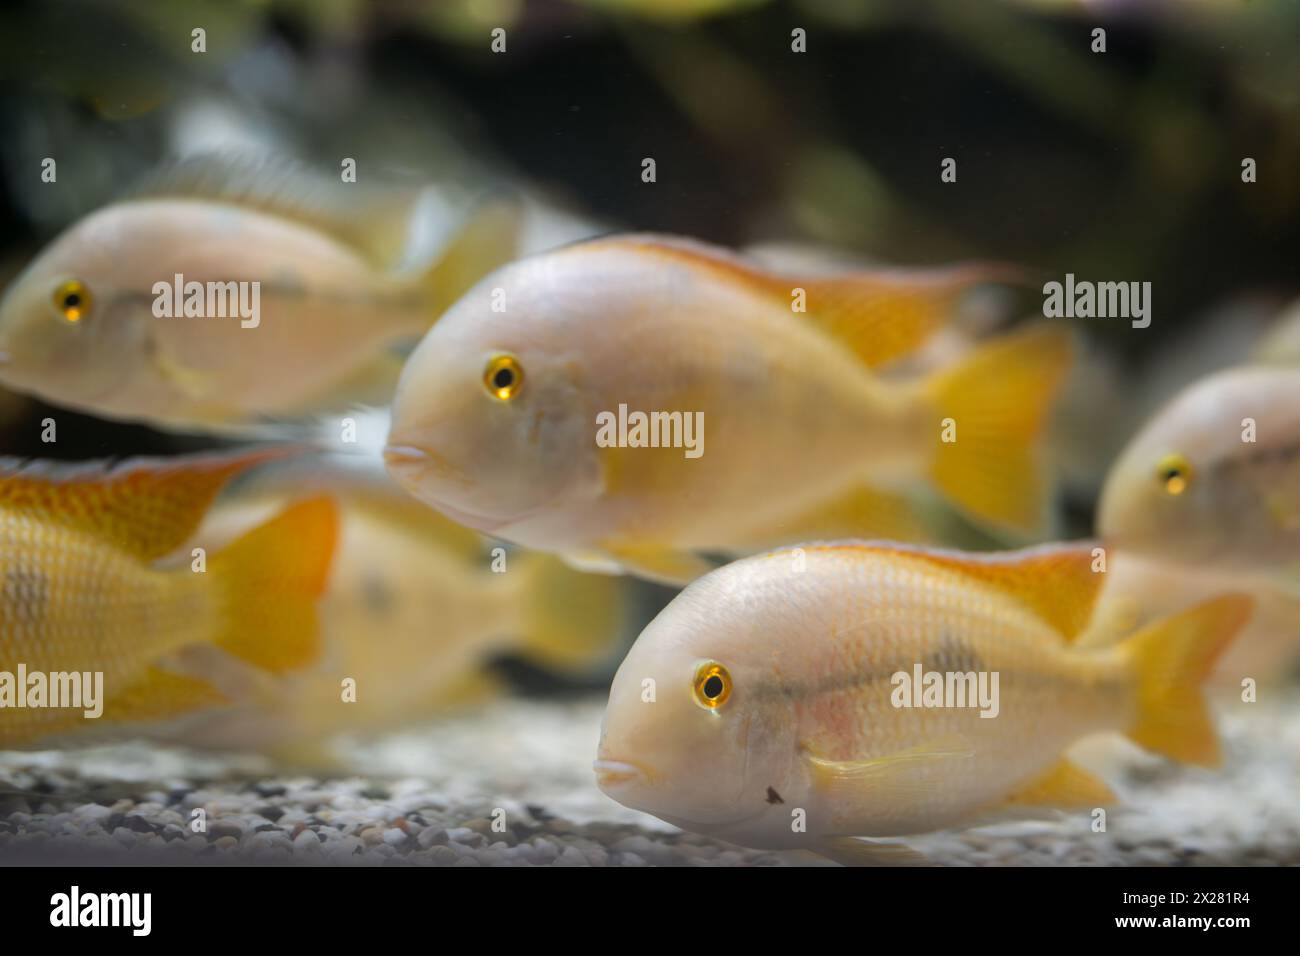 Exotic sea fishes in a aquarium. Nicaragua Cichlid (Hypsophrys nicaraguensis), also known as the moga, nickie, butterfly cichlid or parrot cichlid. Ba Stock Photo